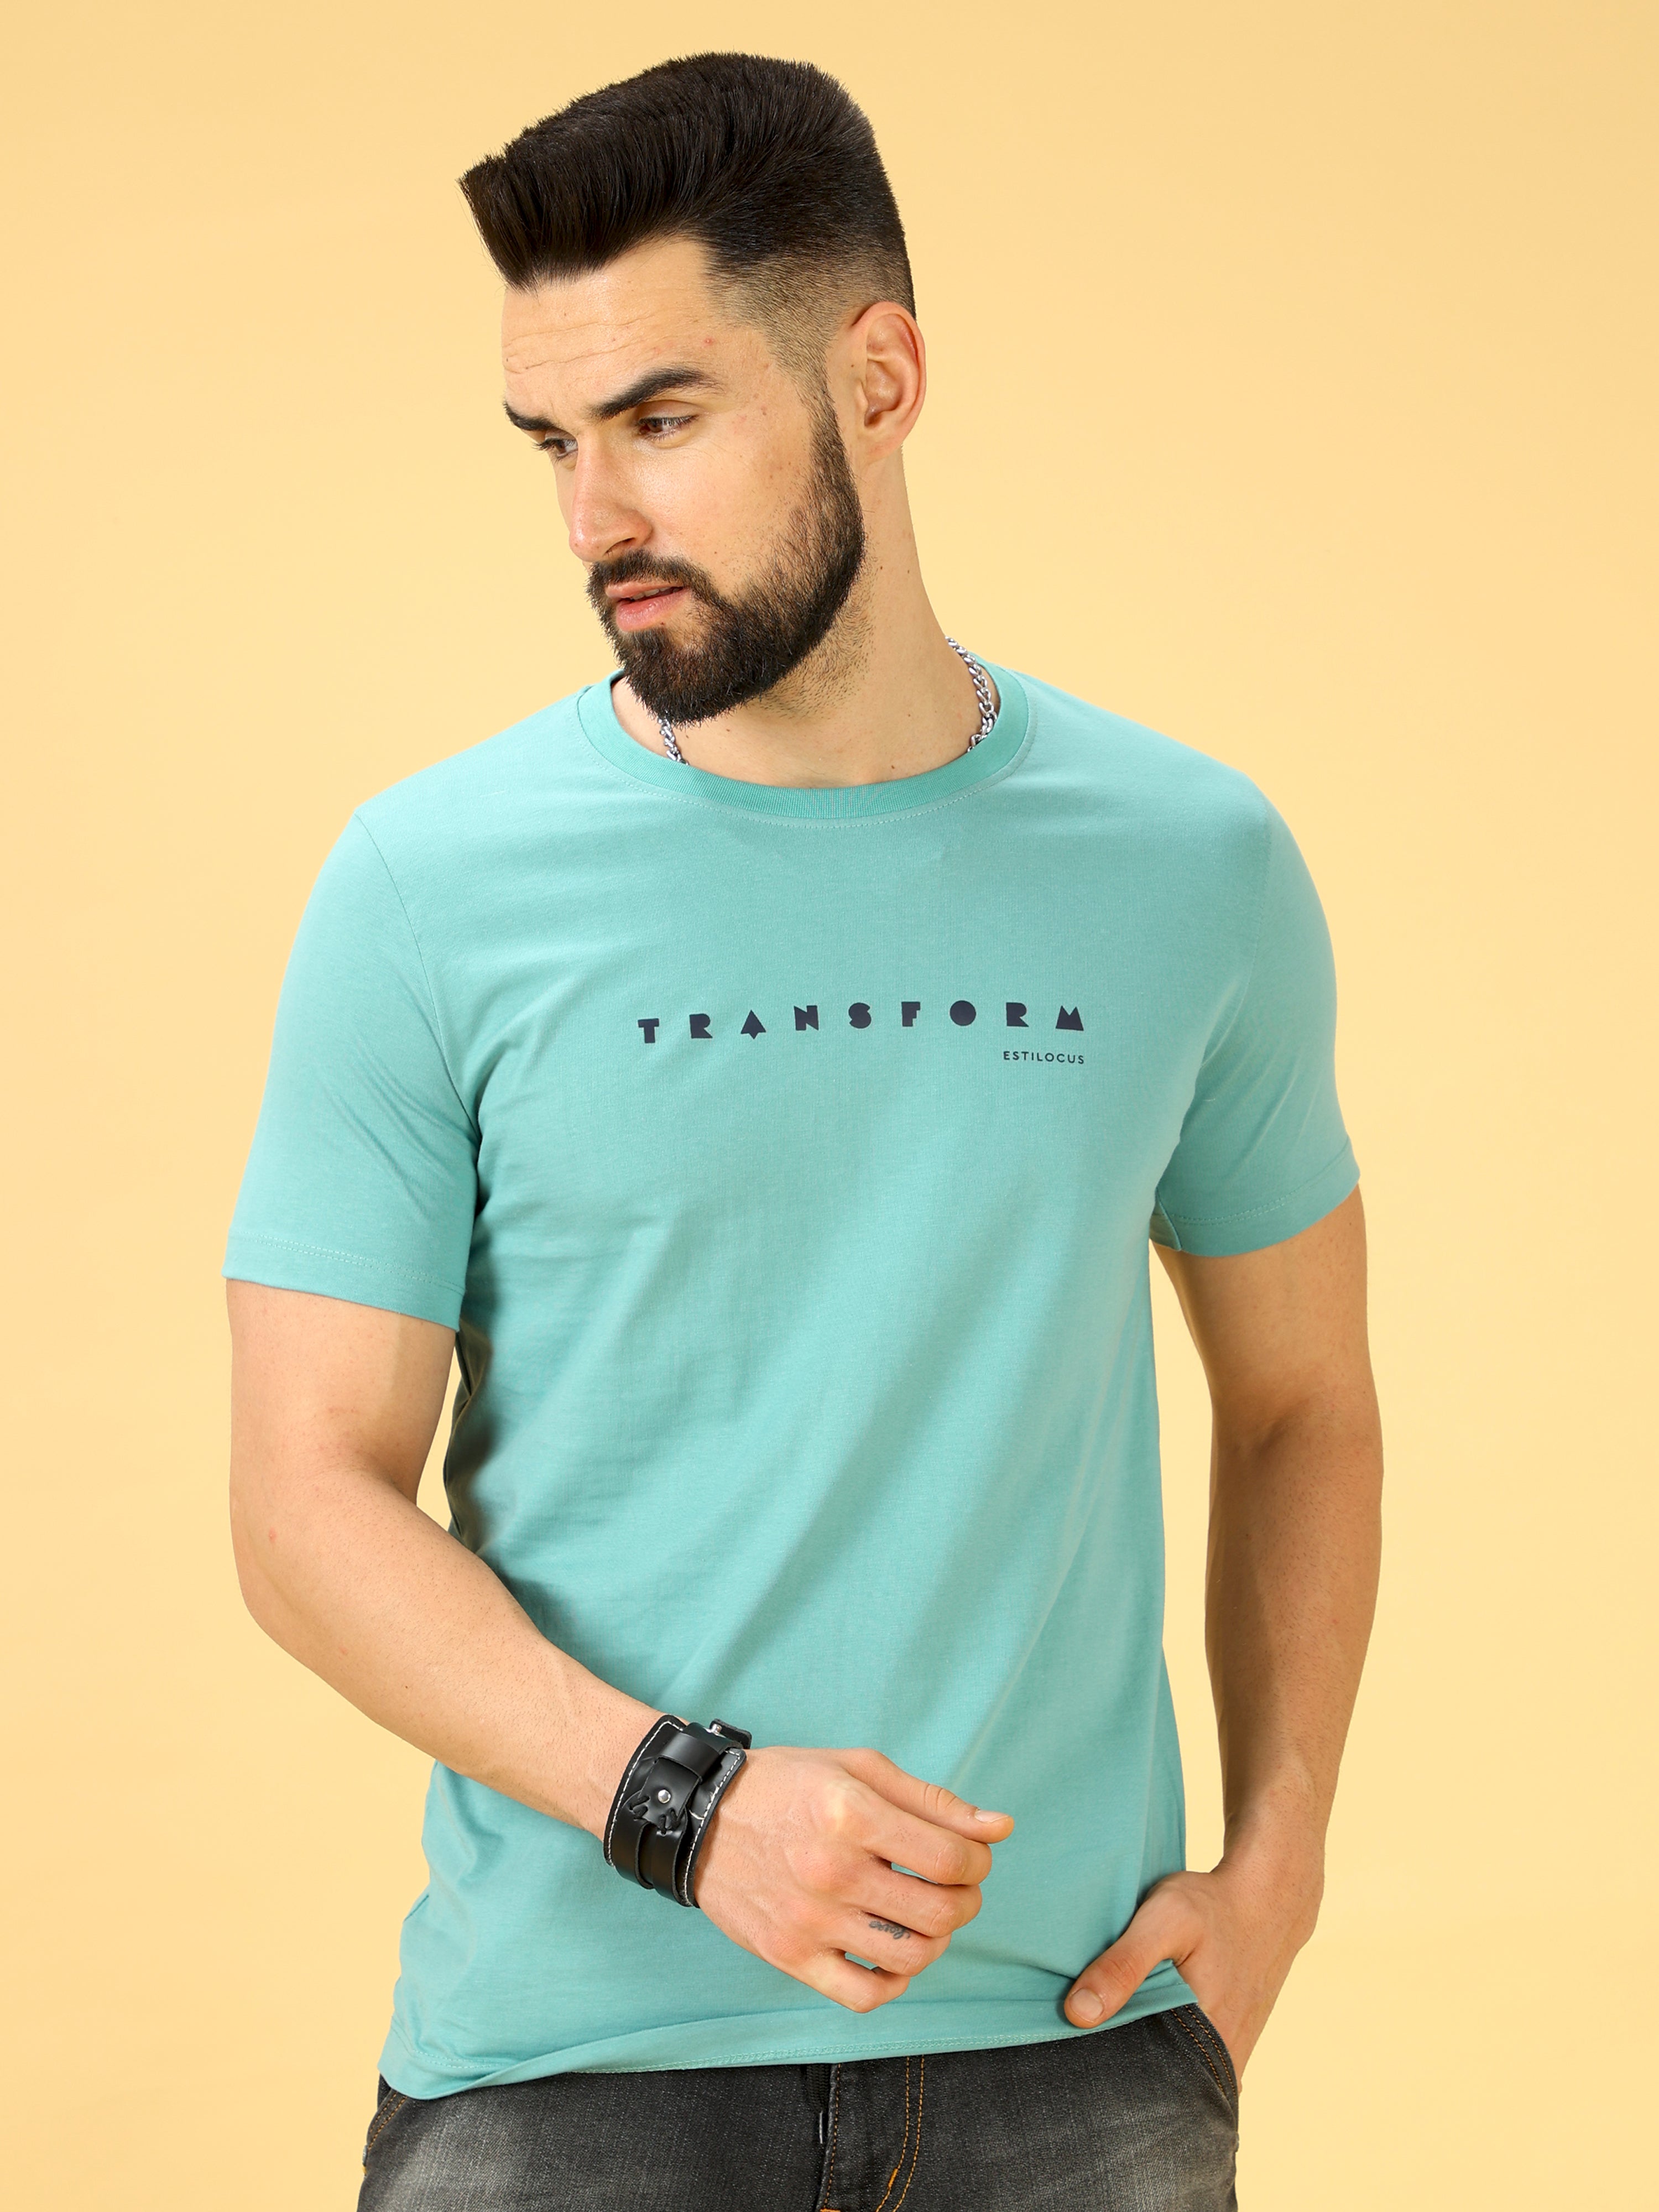 Transform Navy Print Crew Neck T-Shirt shop online at Estilocus. This pure cotton printed T-shirt is a stylish go-to for laidback days. Cut in a comfy regular fit. • 100% Cotton knitted interlock 190GSM• Bio washed fabric• Round neck T-shirt • Half sleeve